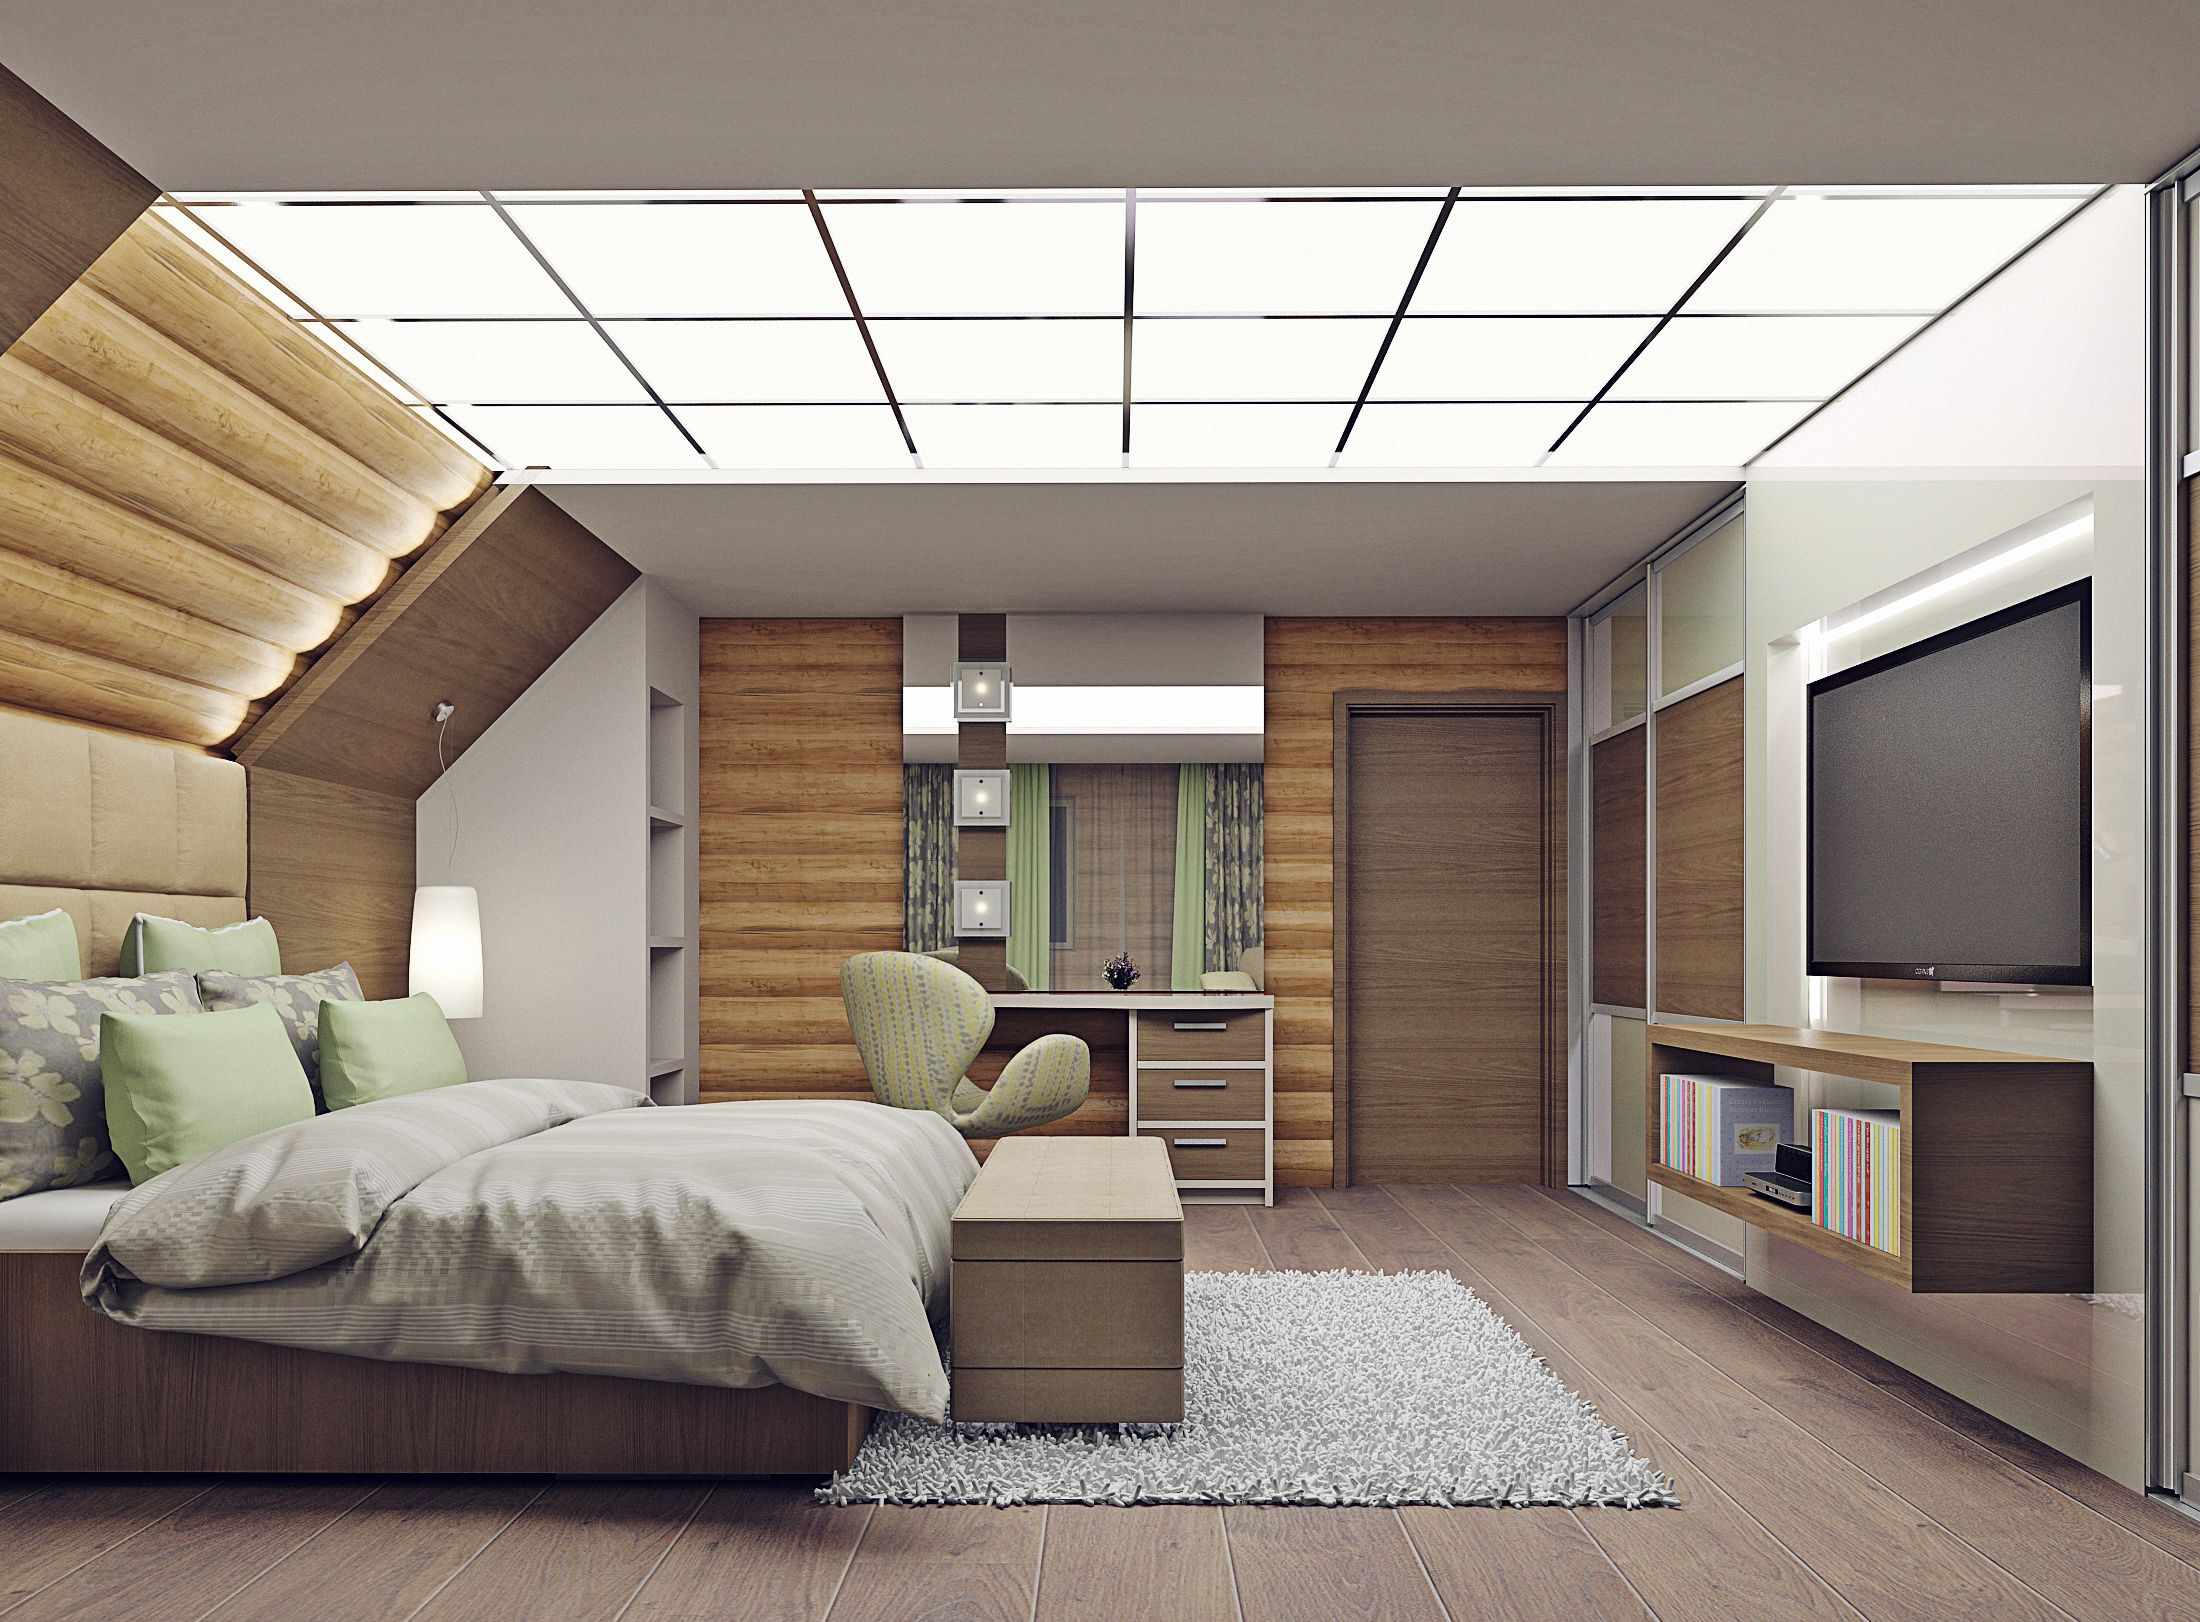 variant of the bright design of a bedroom in the attic